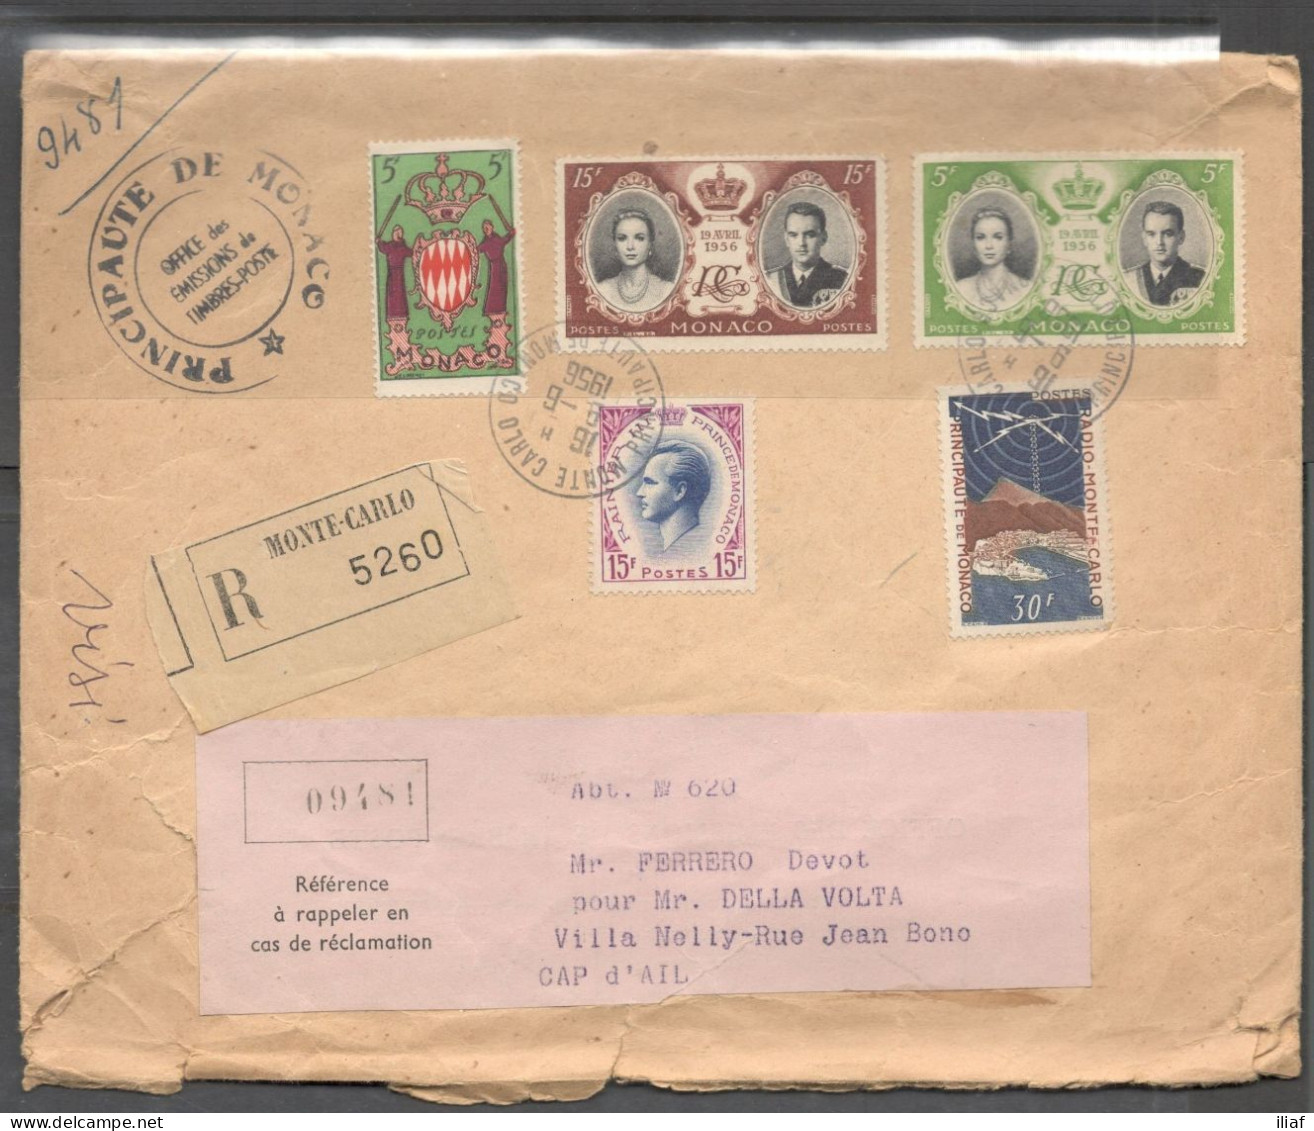 Monaco. Stamps Sc. 280, 318, 337, 369-370 On Registered Letter, Sent From Monte-Carlo, Monaco On 9.06.1956 To Cap-d'Ail - Briefe U. Dokumente